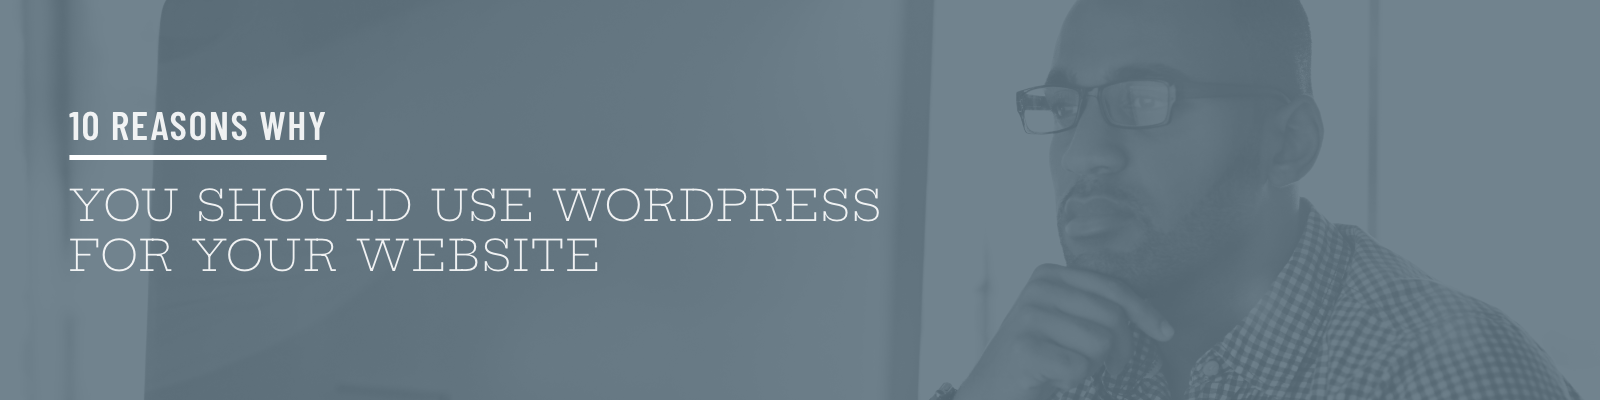 10 Reasons Why You Should Use WordPress For Your Website